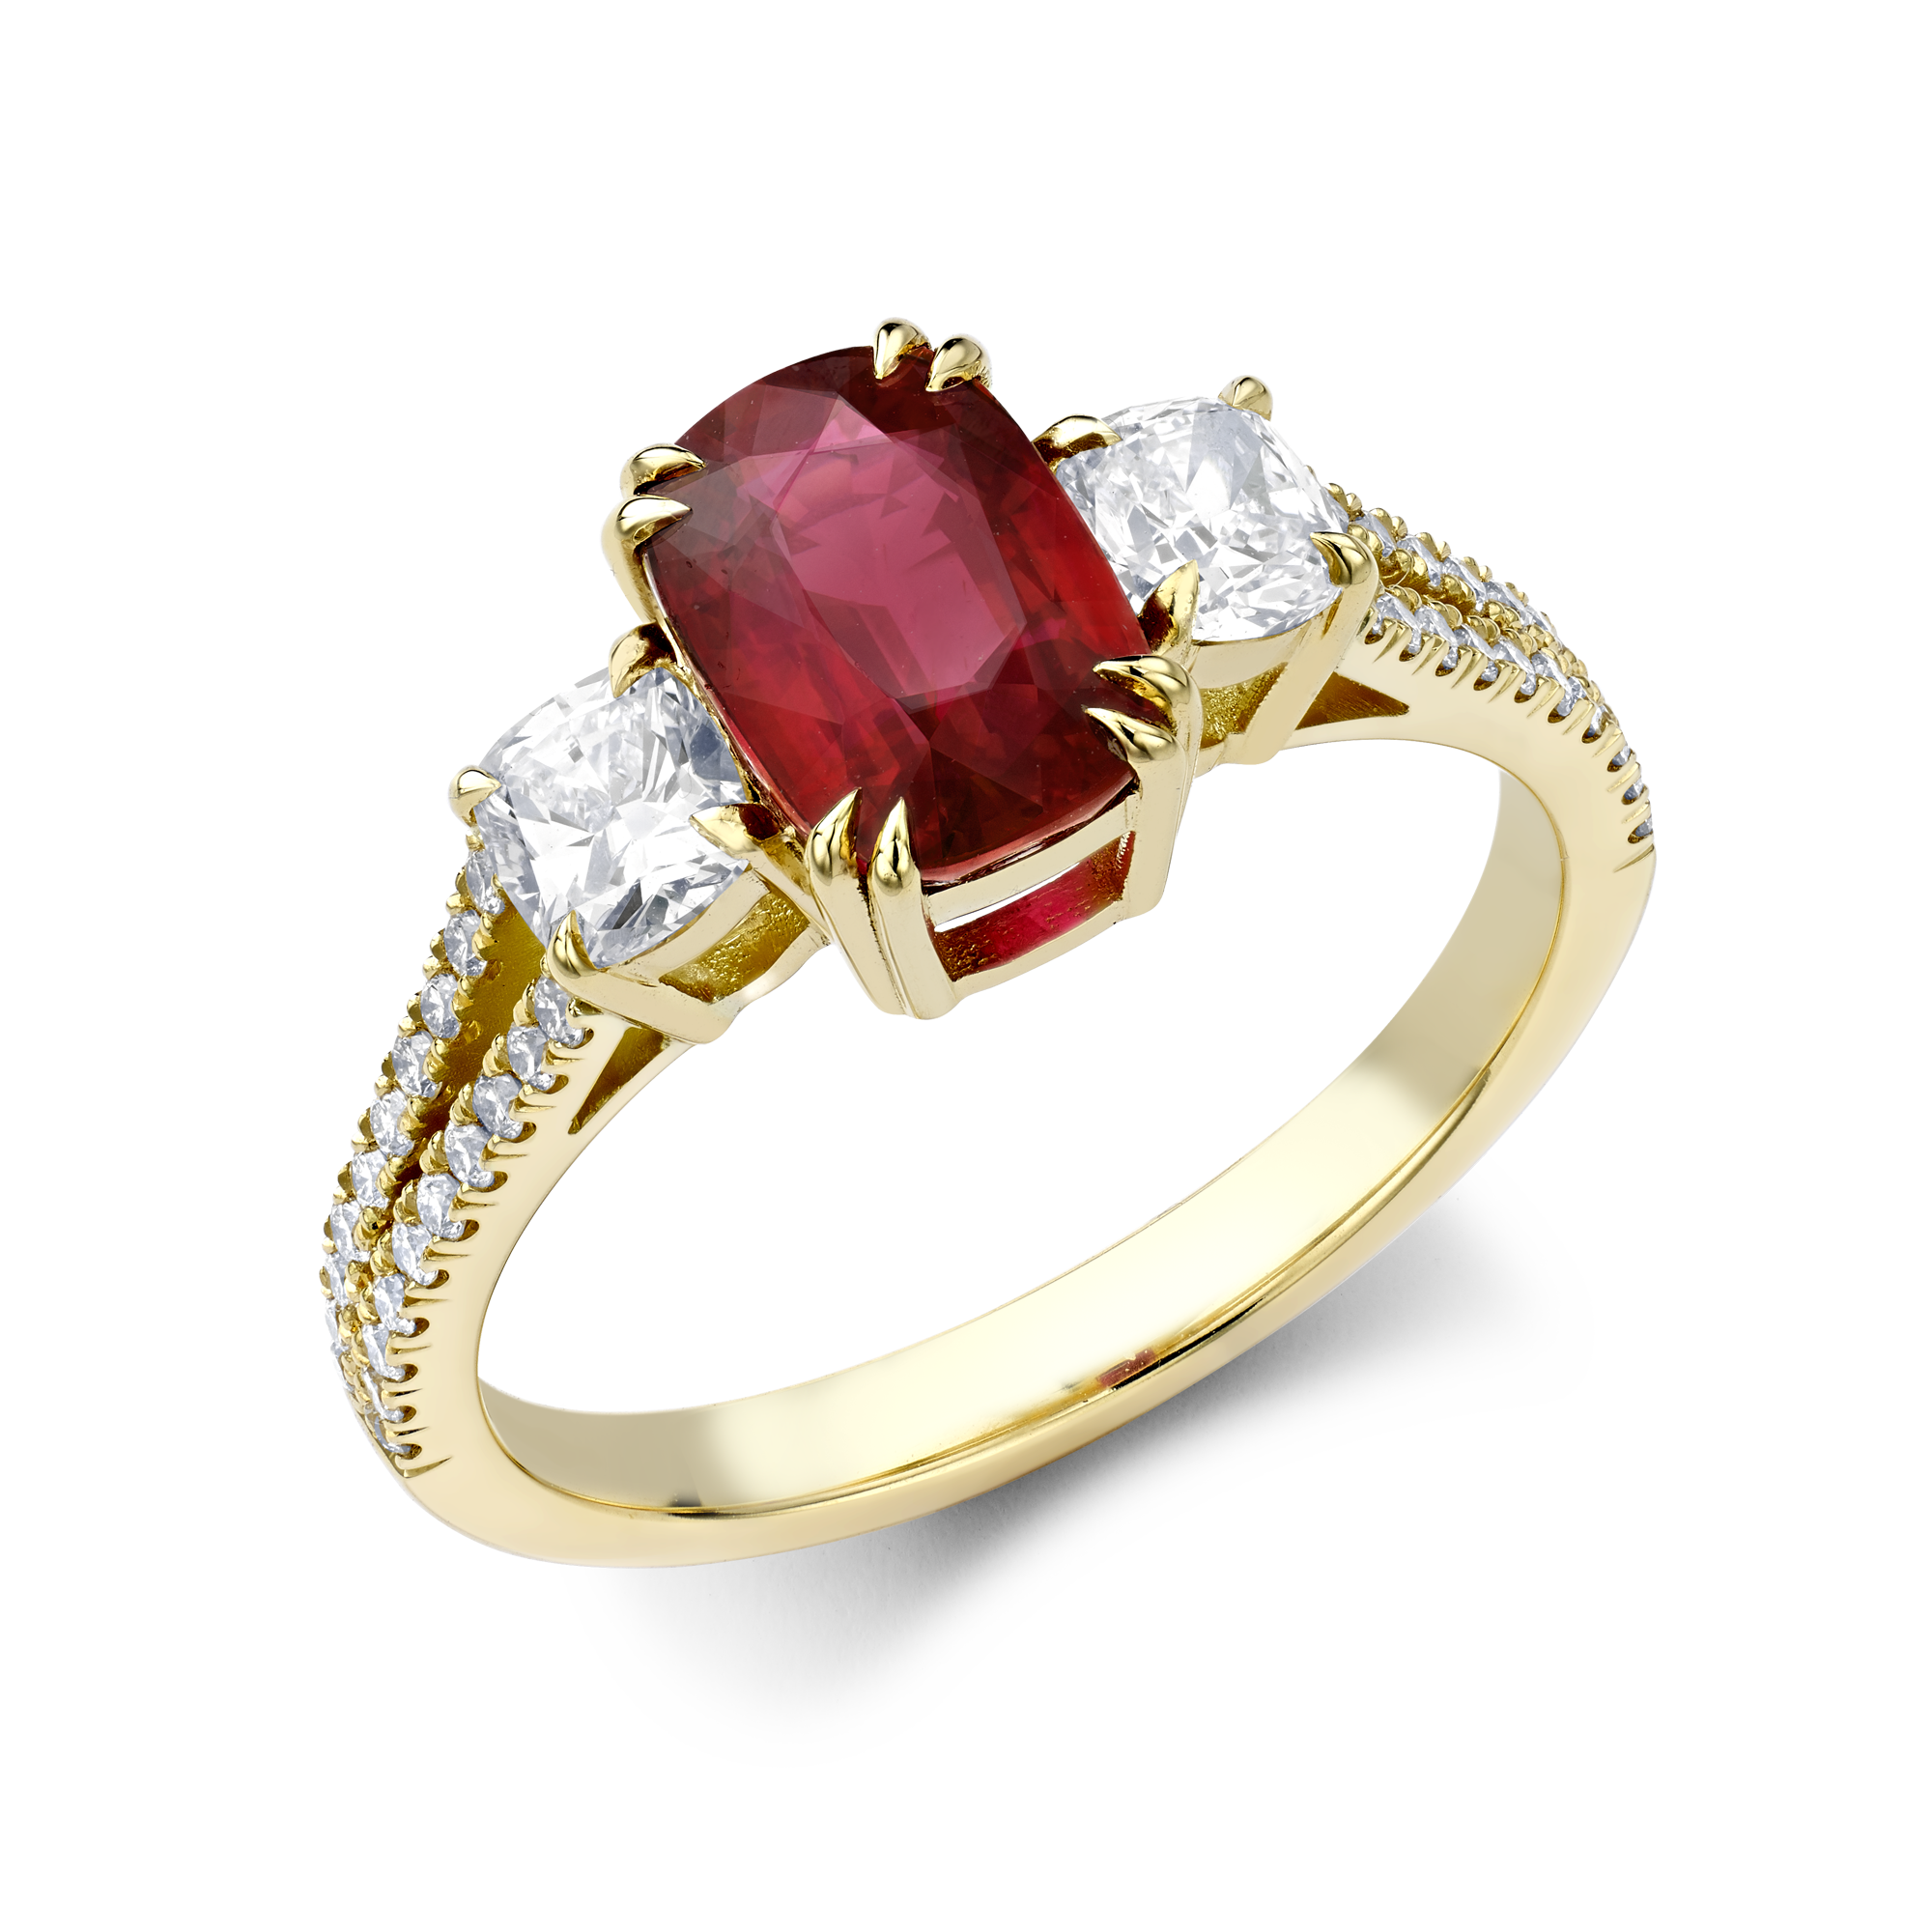 Mozambique 2.04ct Ruby and Diamond Three Stone Ring Cushion Cut, Claw Set_1